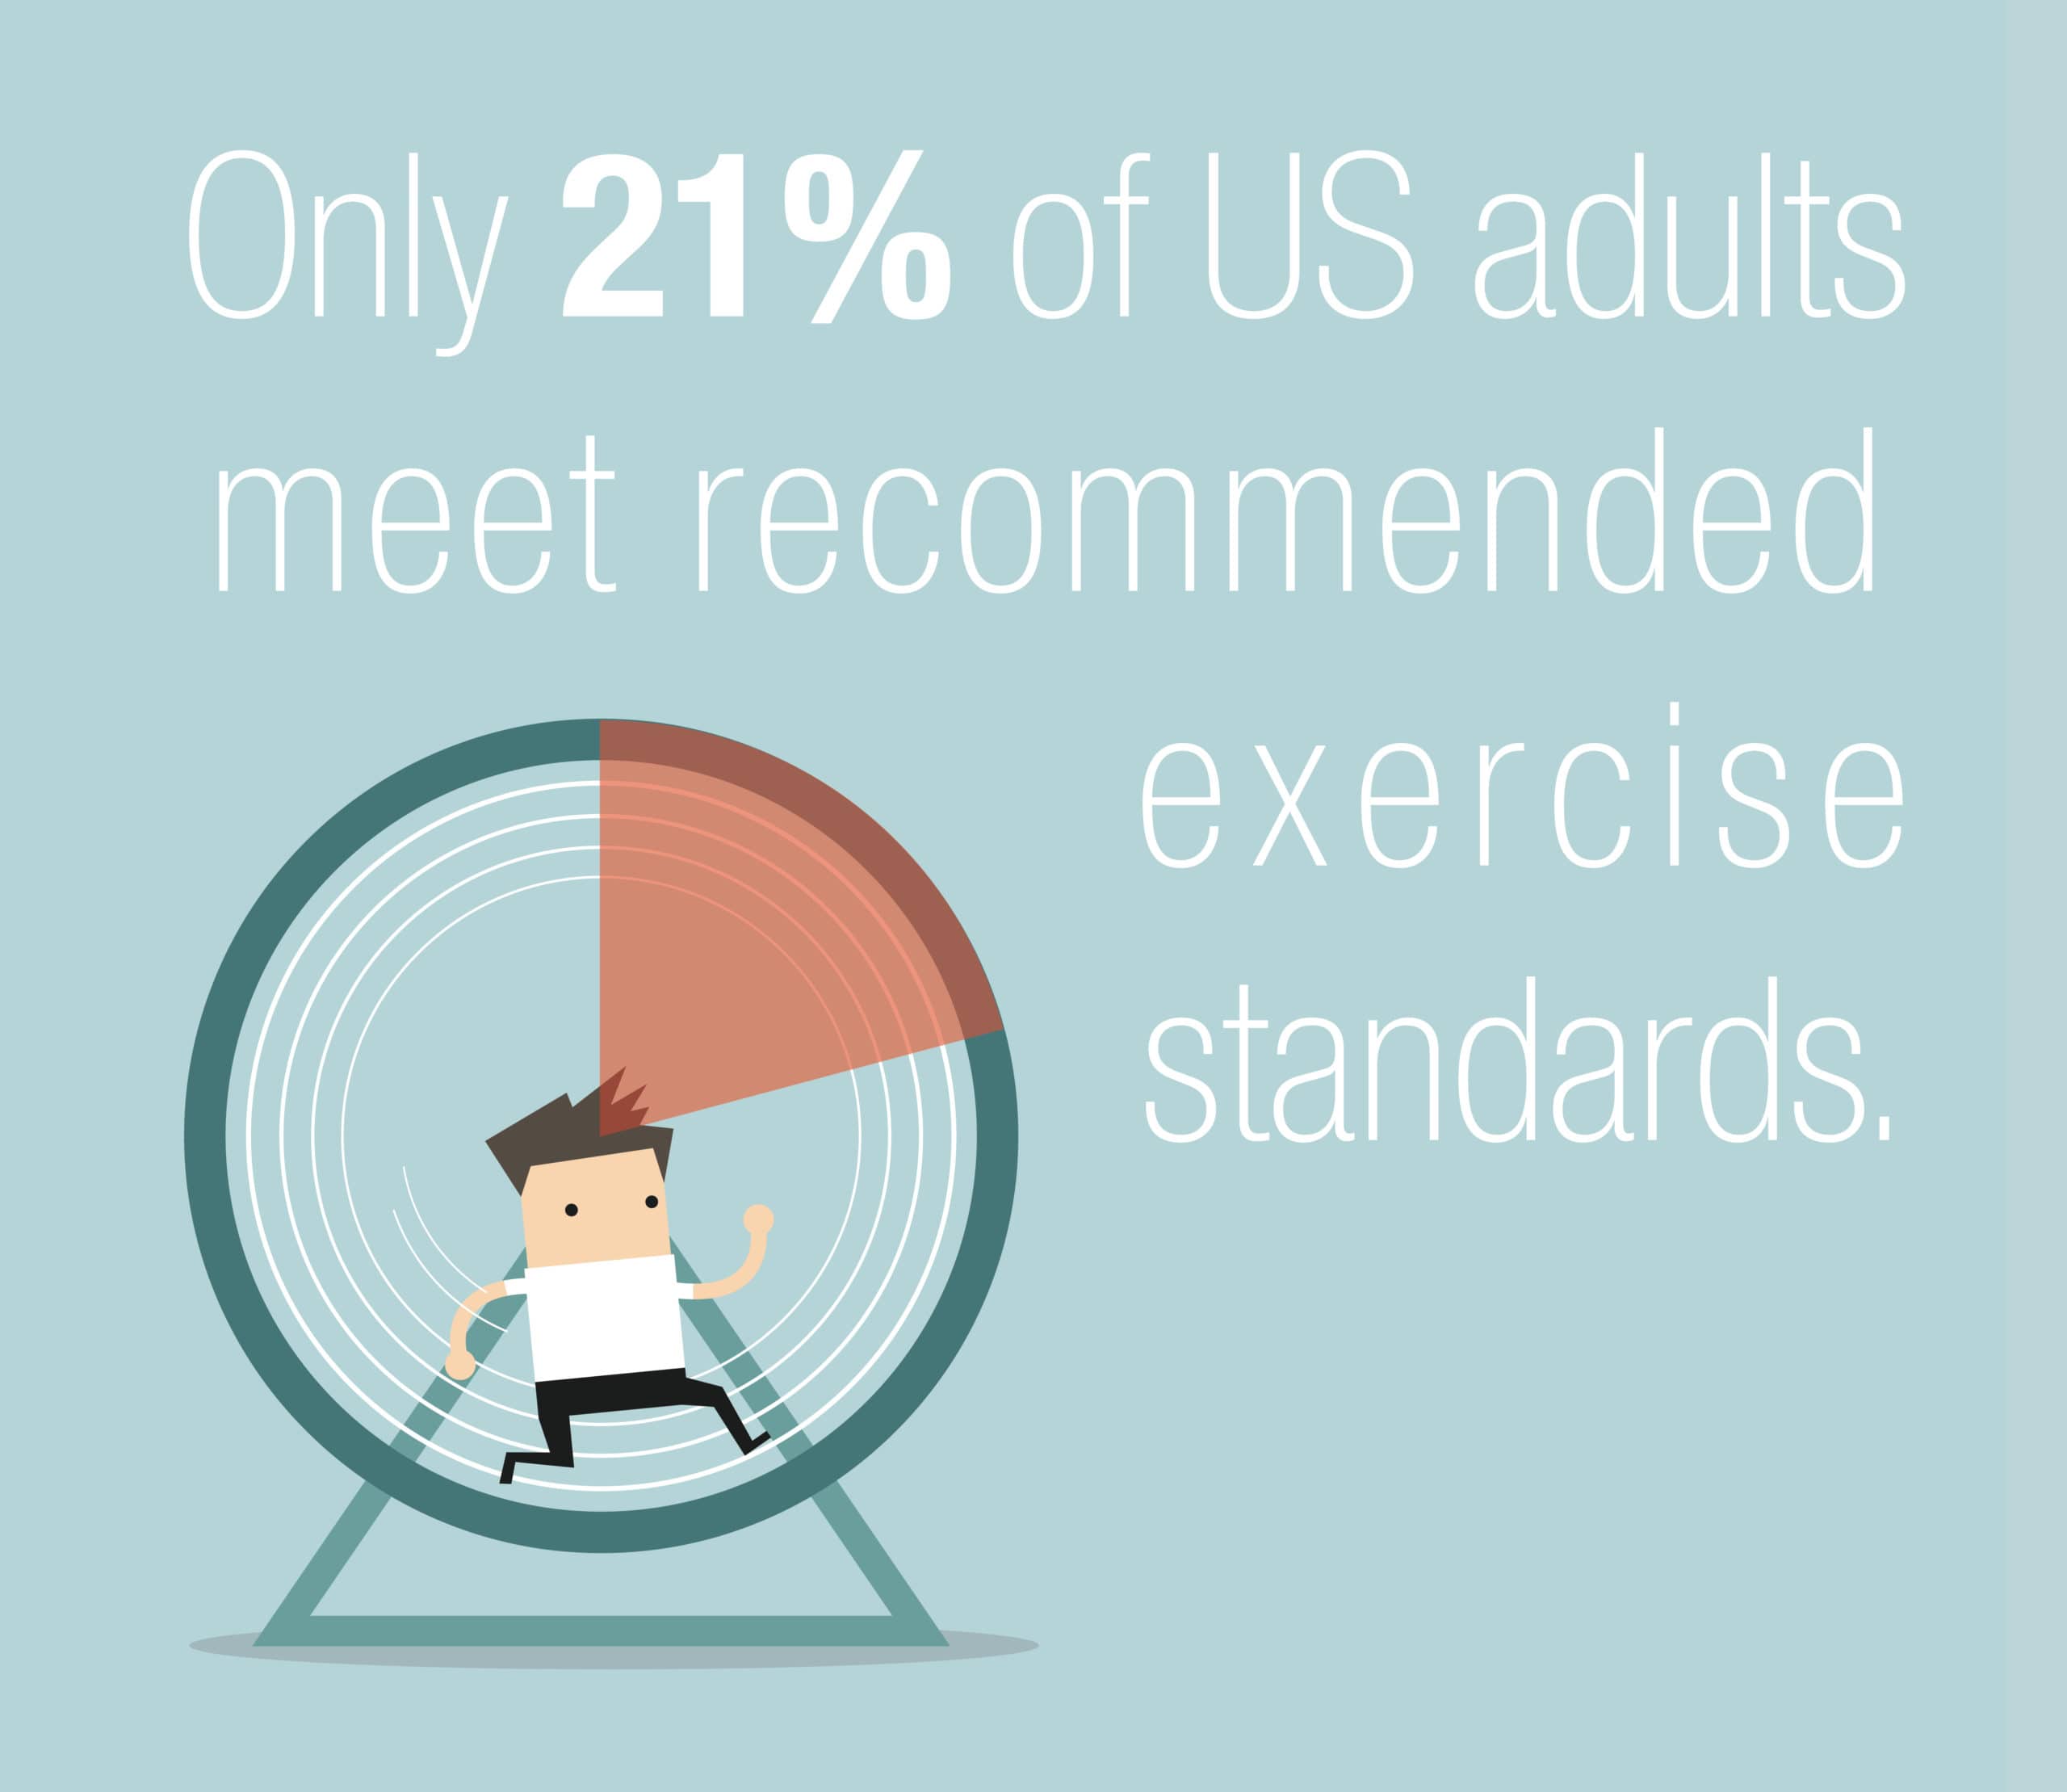 Illustrated image of 21 percent of U.S. adults meet recommended exercise standards